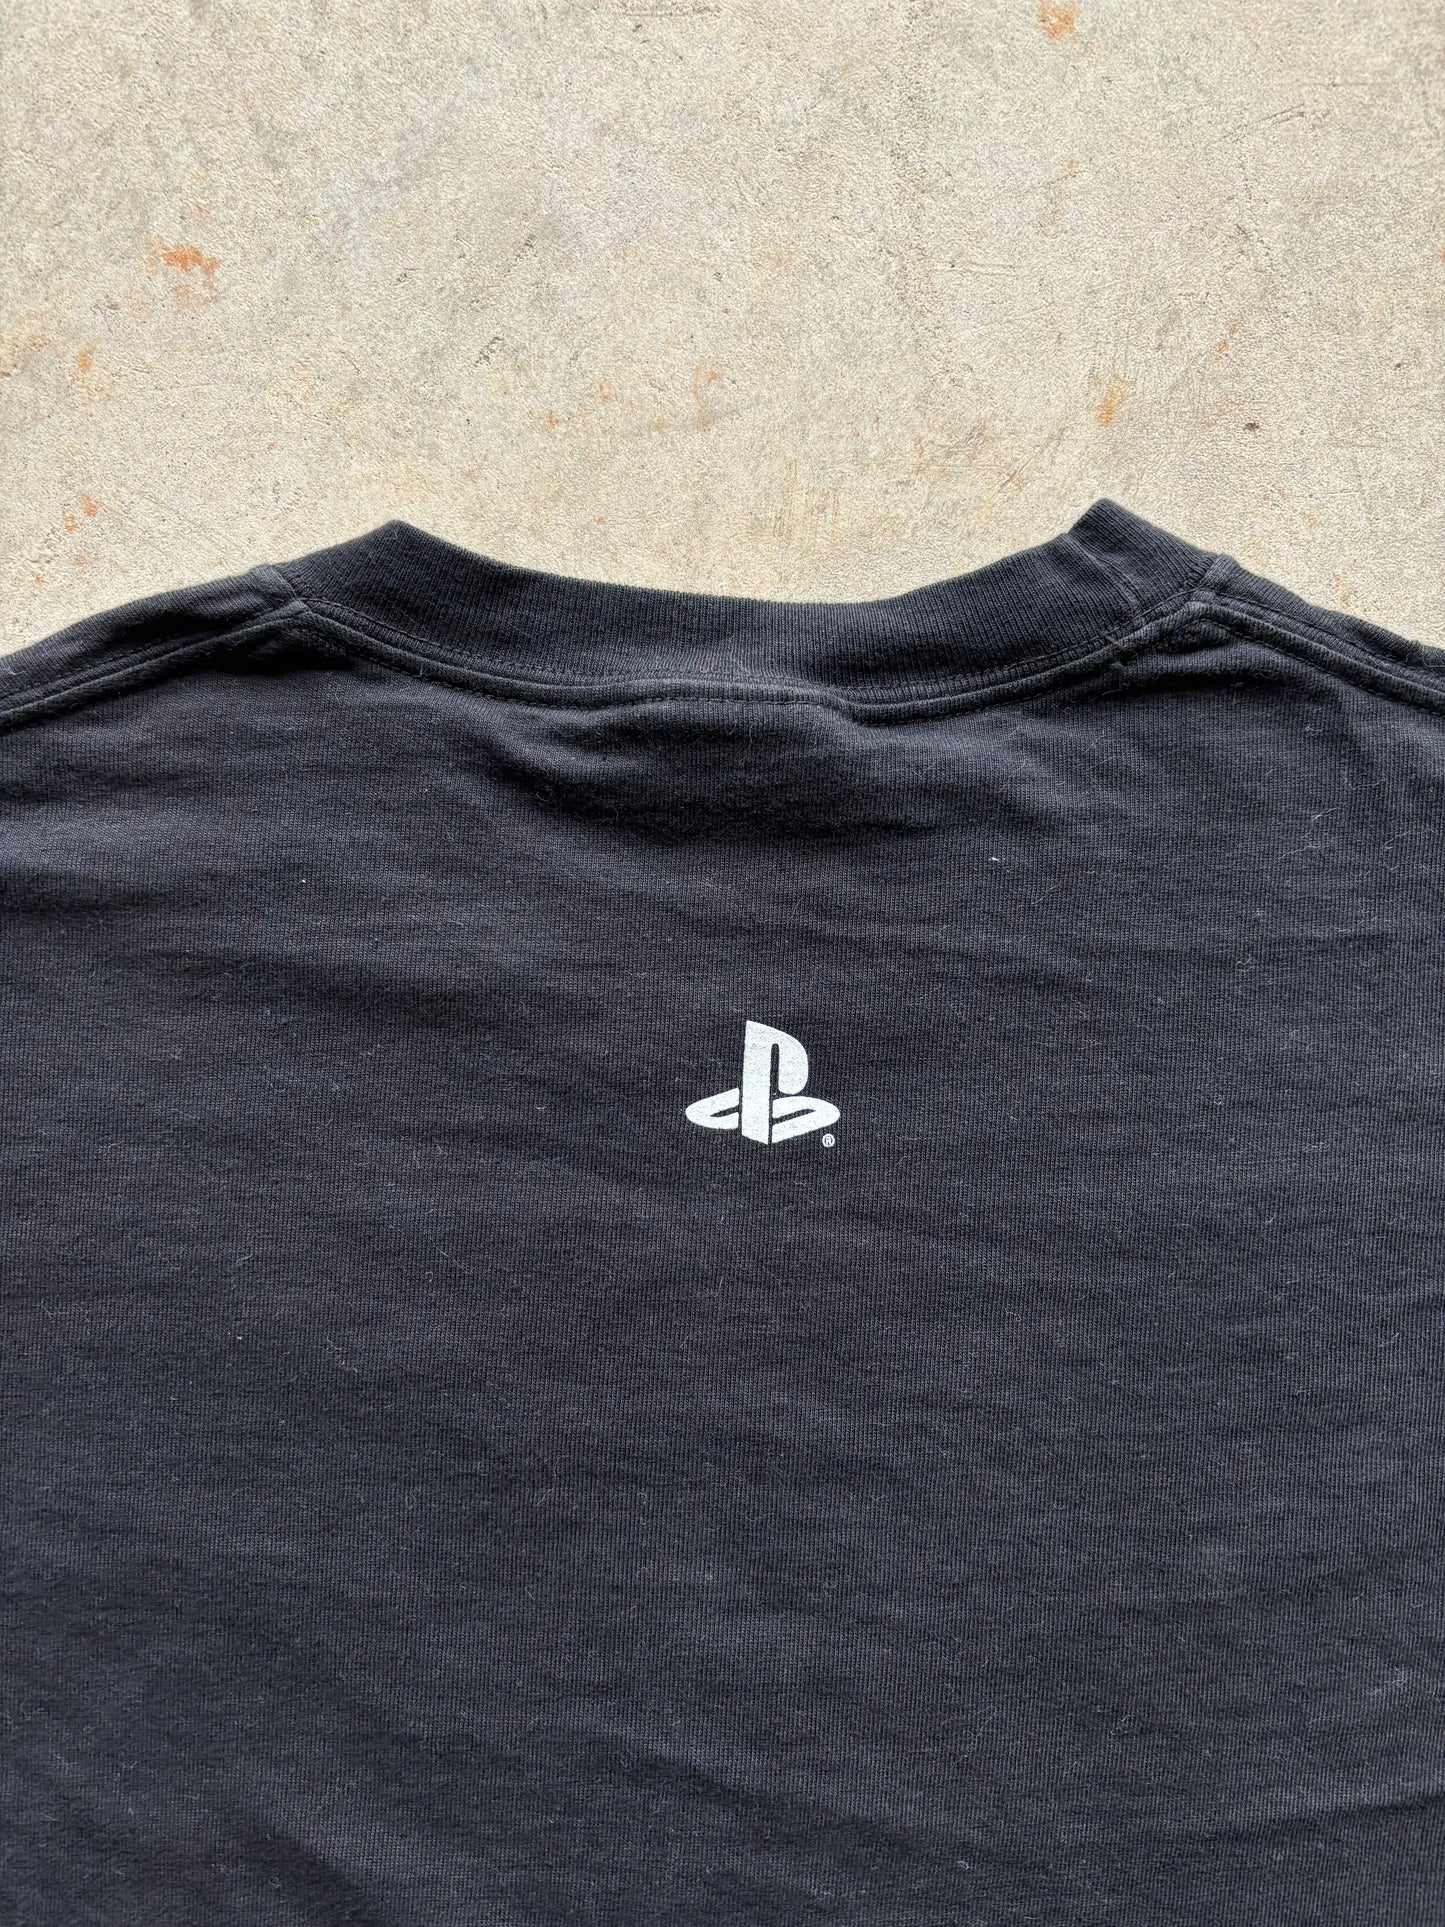 Early 2000's Playstation Promo Tee Size XL